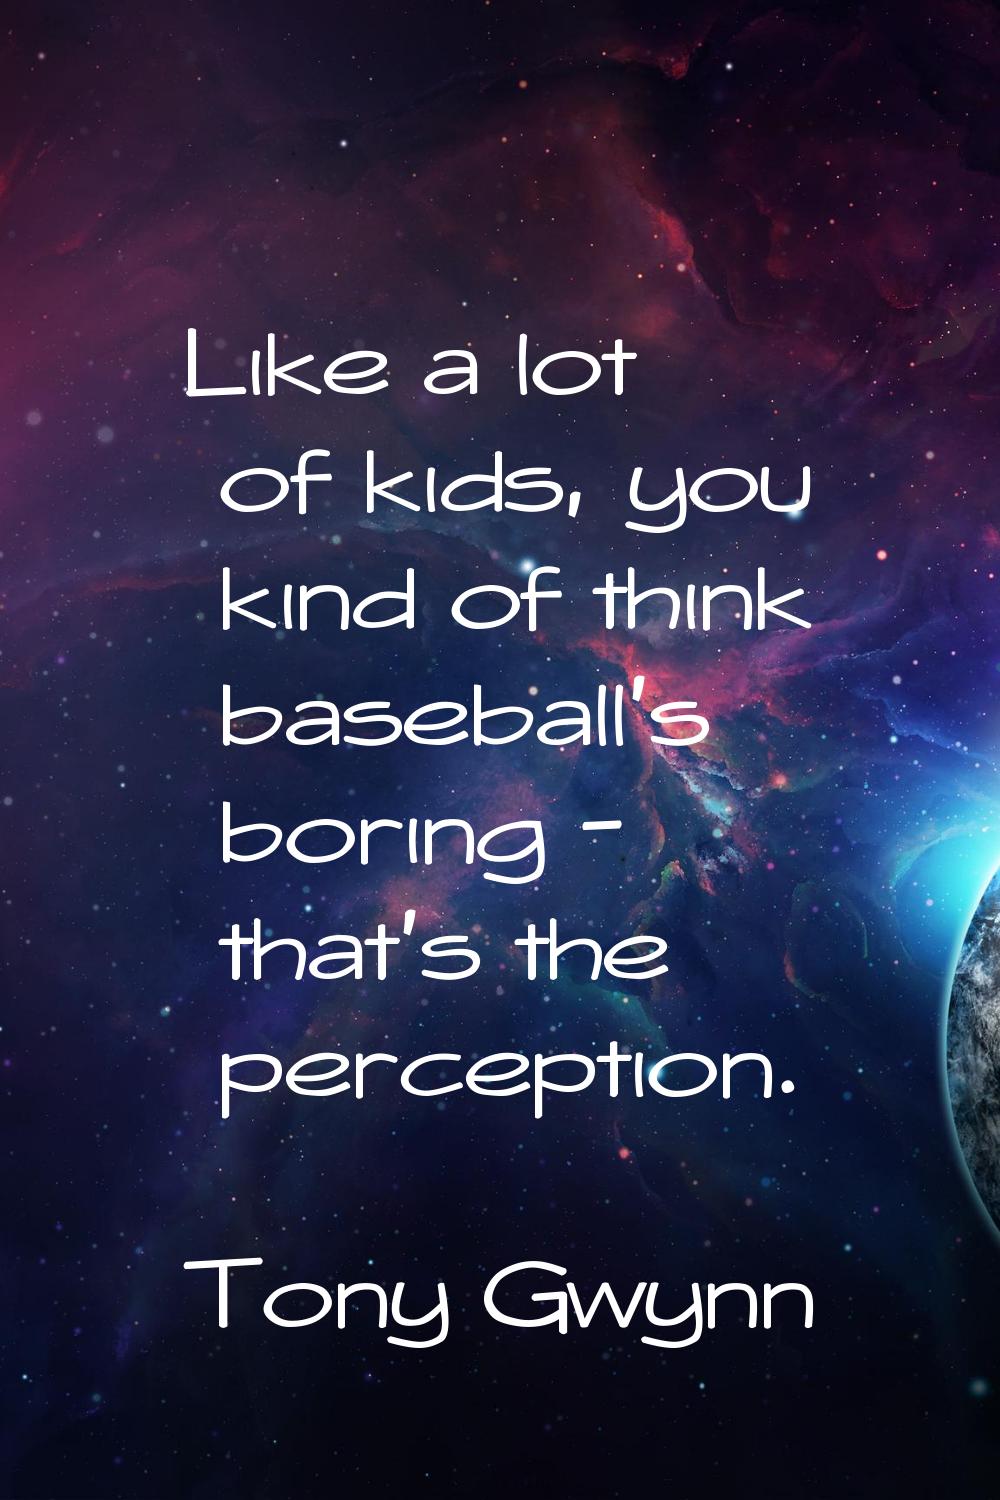 Like a lot of kids, you kind of think baseball's boring - that's the perception.